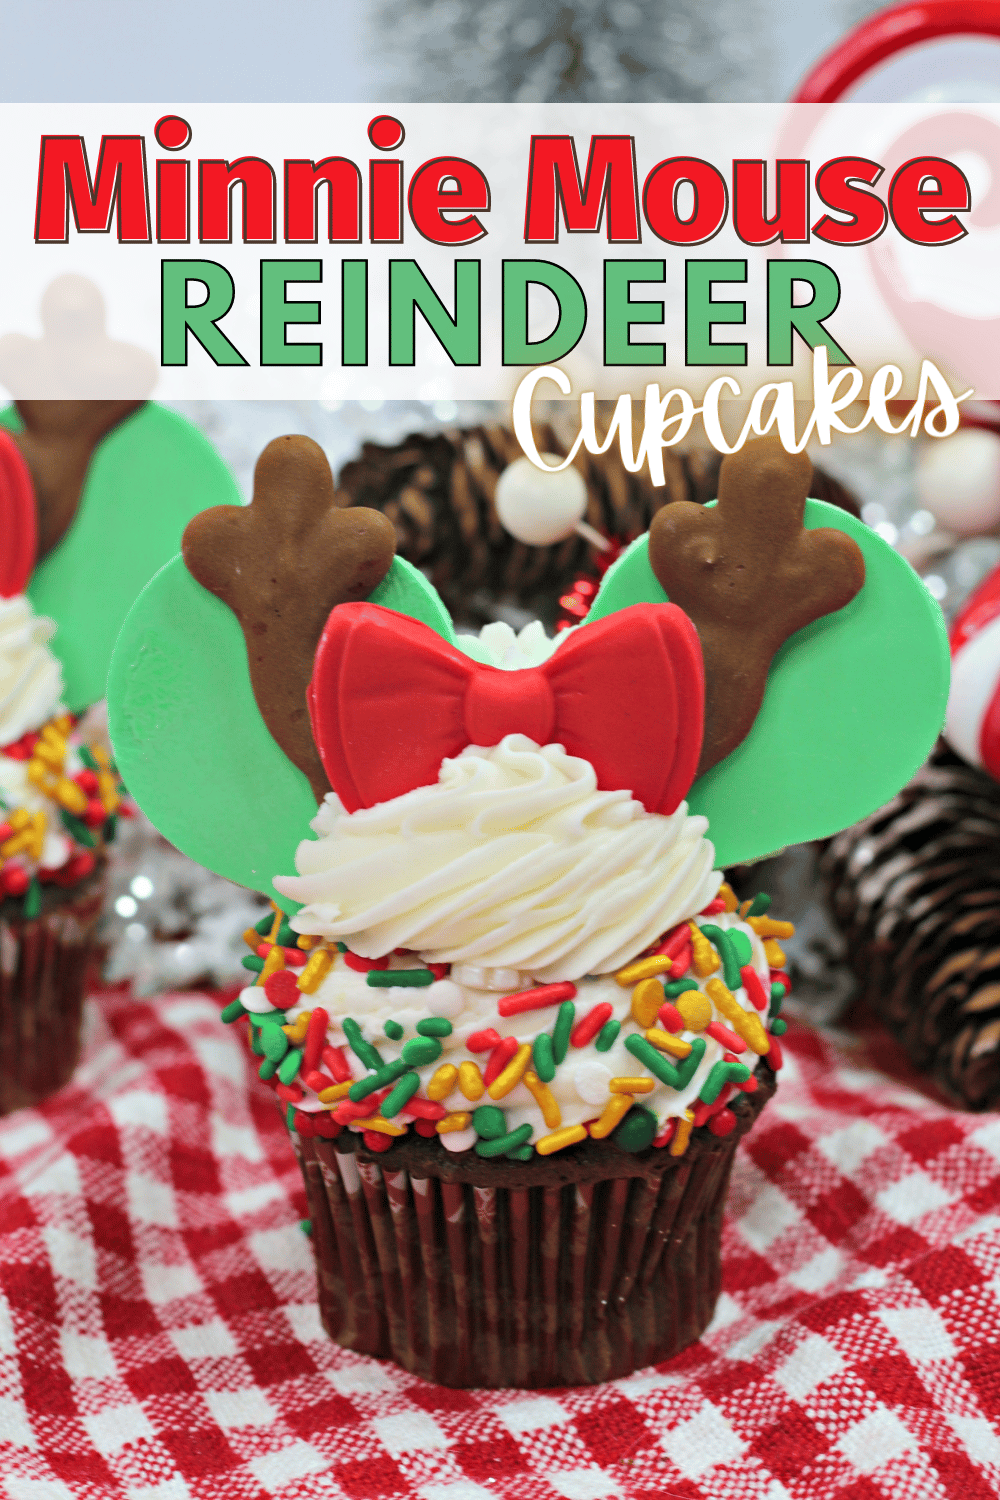 These Minnie Mouse Reindeer Cupcakes are the perfect festive treat for the holidays. The cupcakes are moist, tender, and irresistible. #minniemousecupcakes #reindeercupcakes #minniemousereindeercupcakes #christmascupcakes via @wondermomwannab